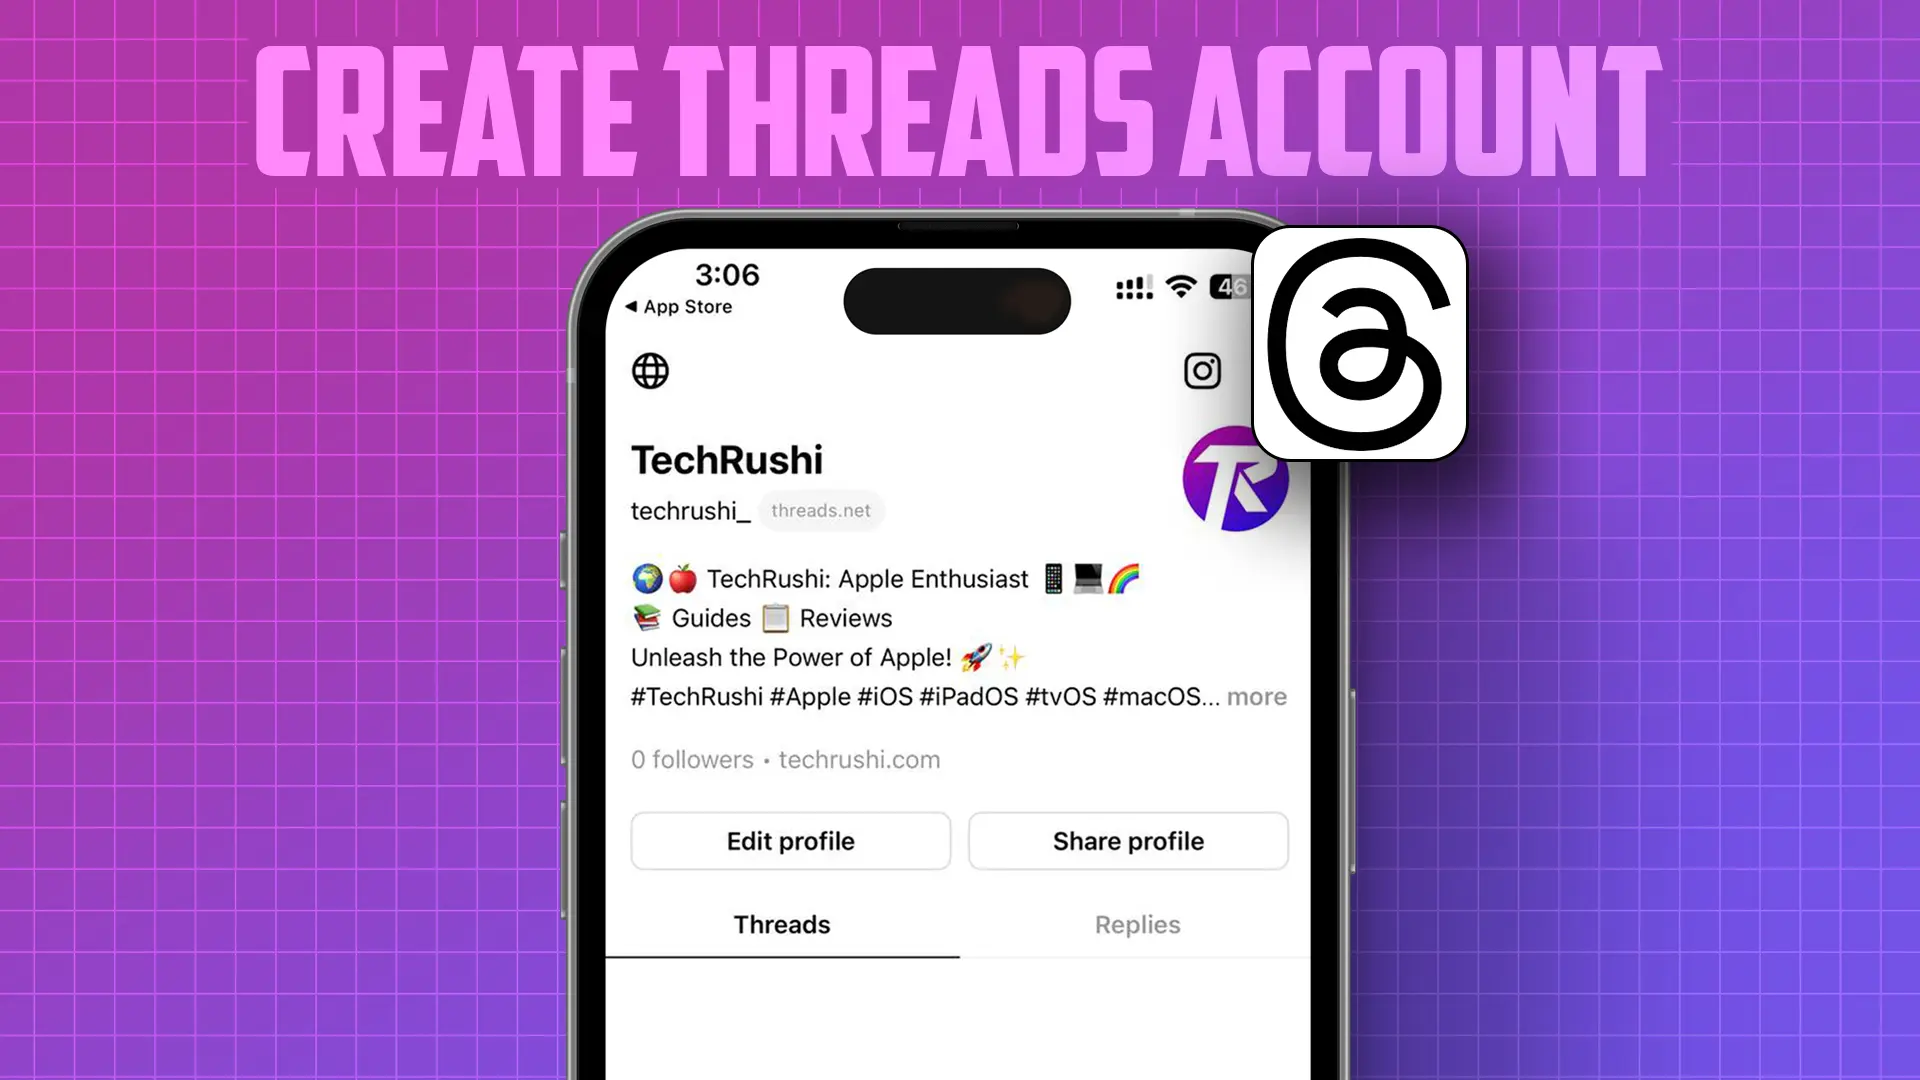 Sign Up or Create Threads Account on iPhone